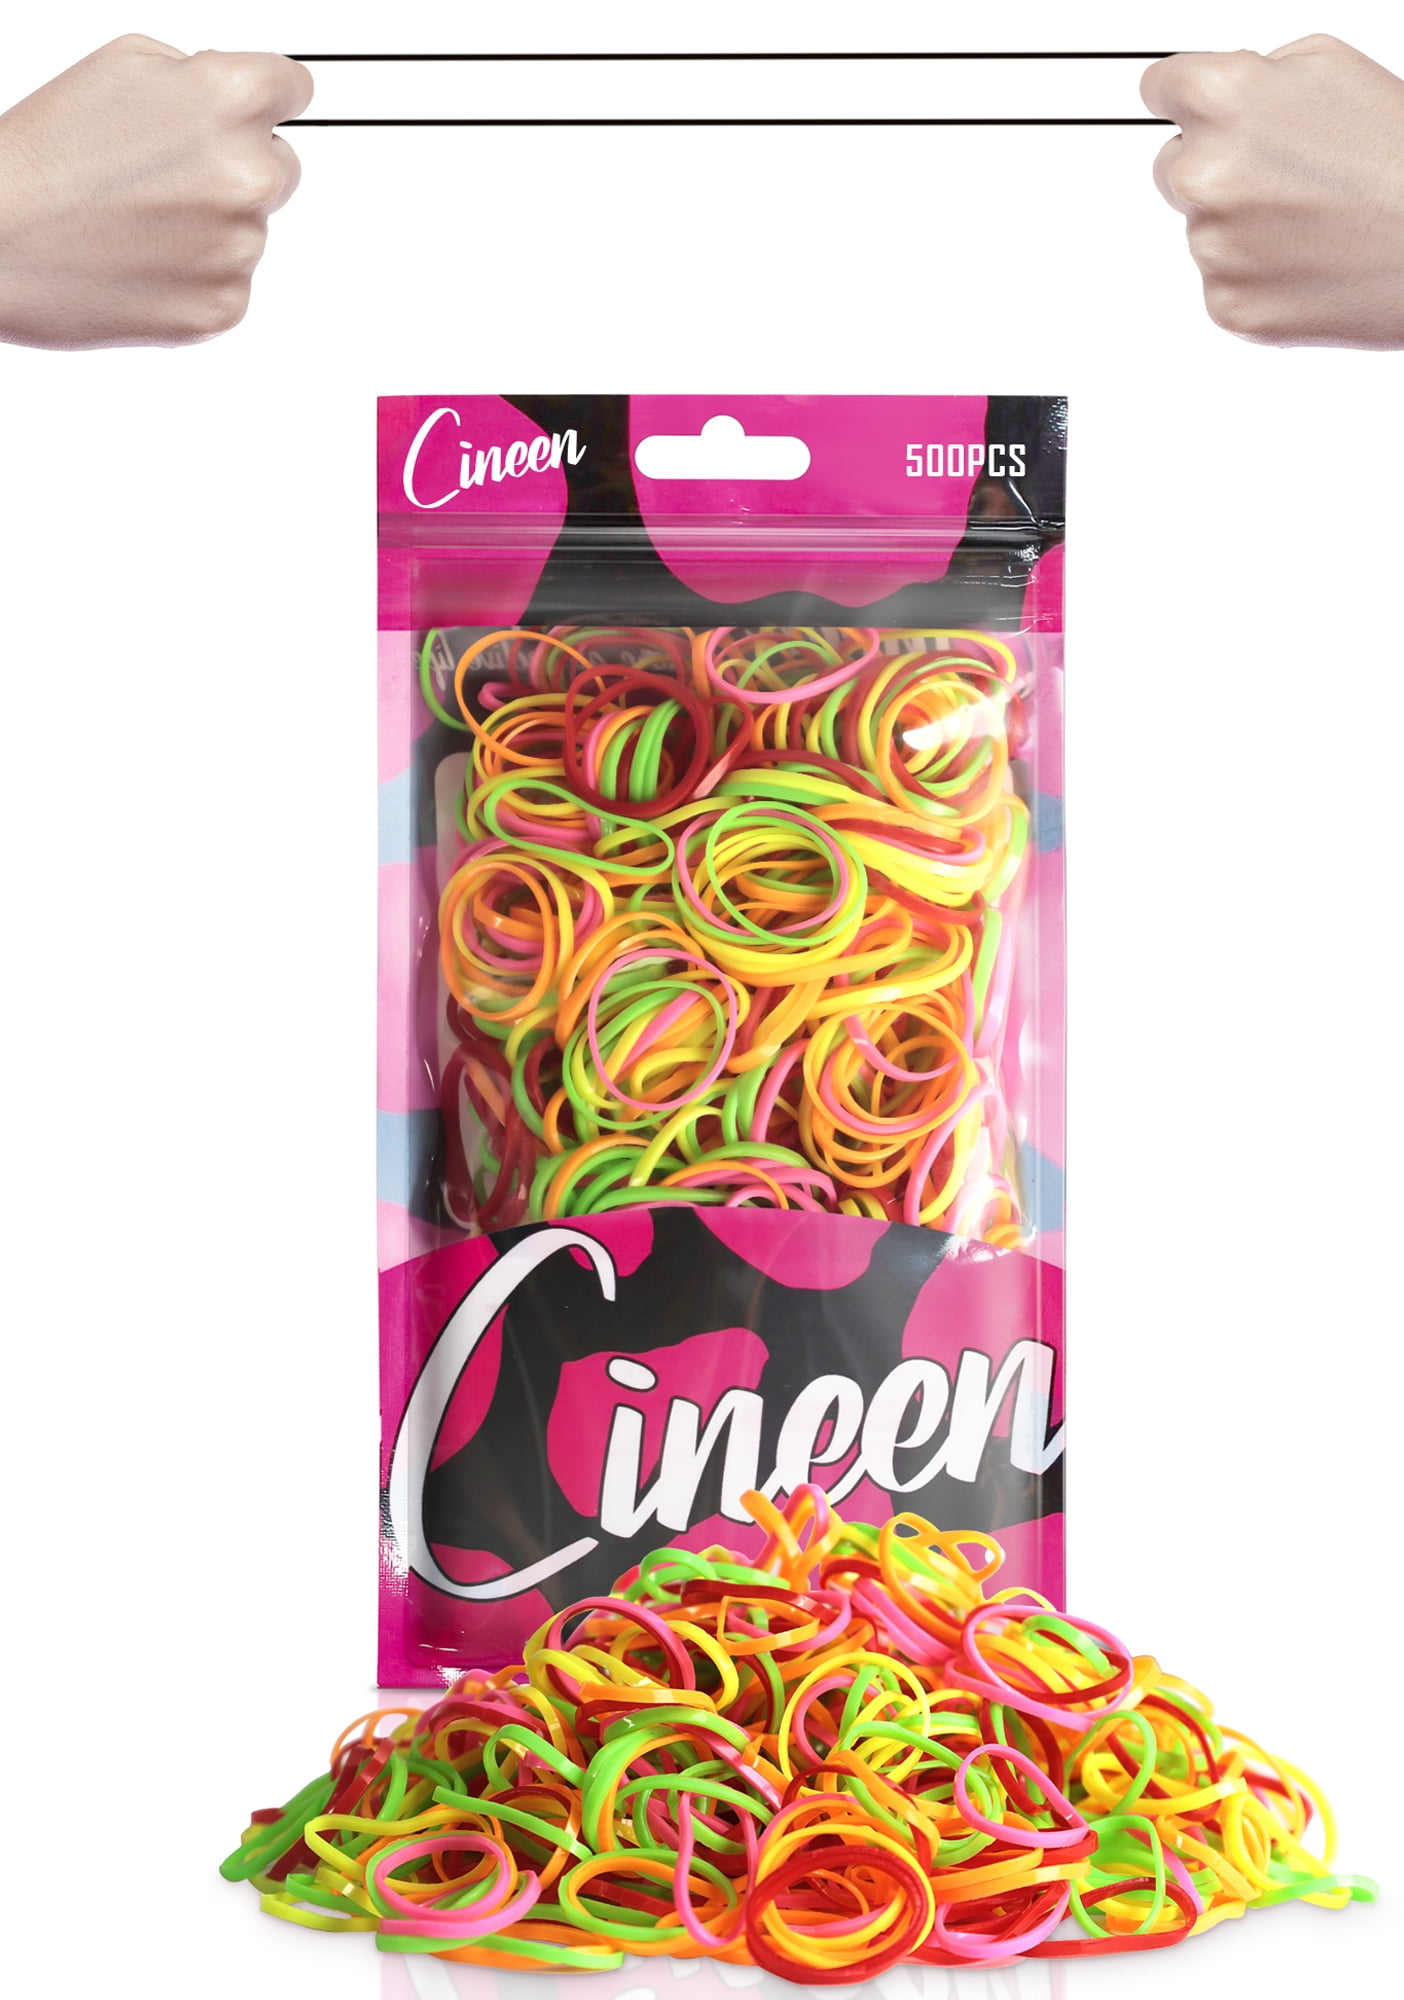 CINEEN 500pcs Mini Rubber Bands,Soft Elastic Hair Ties,Ponytail Holders  Headbands for Women Hair Accessories 